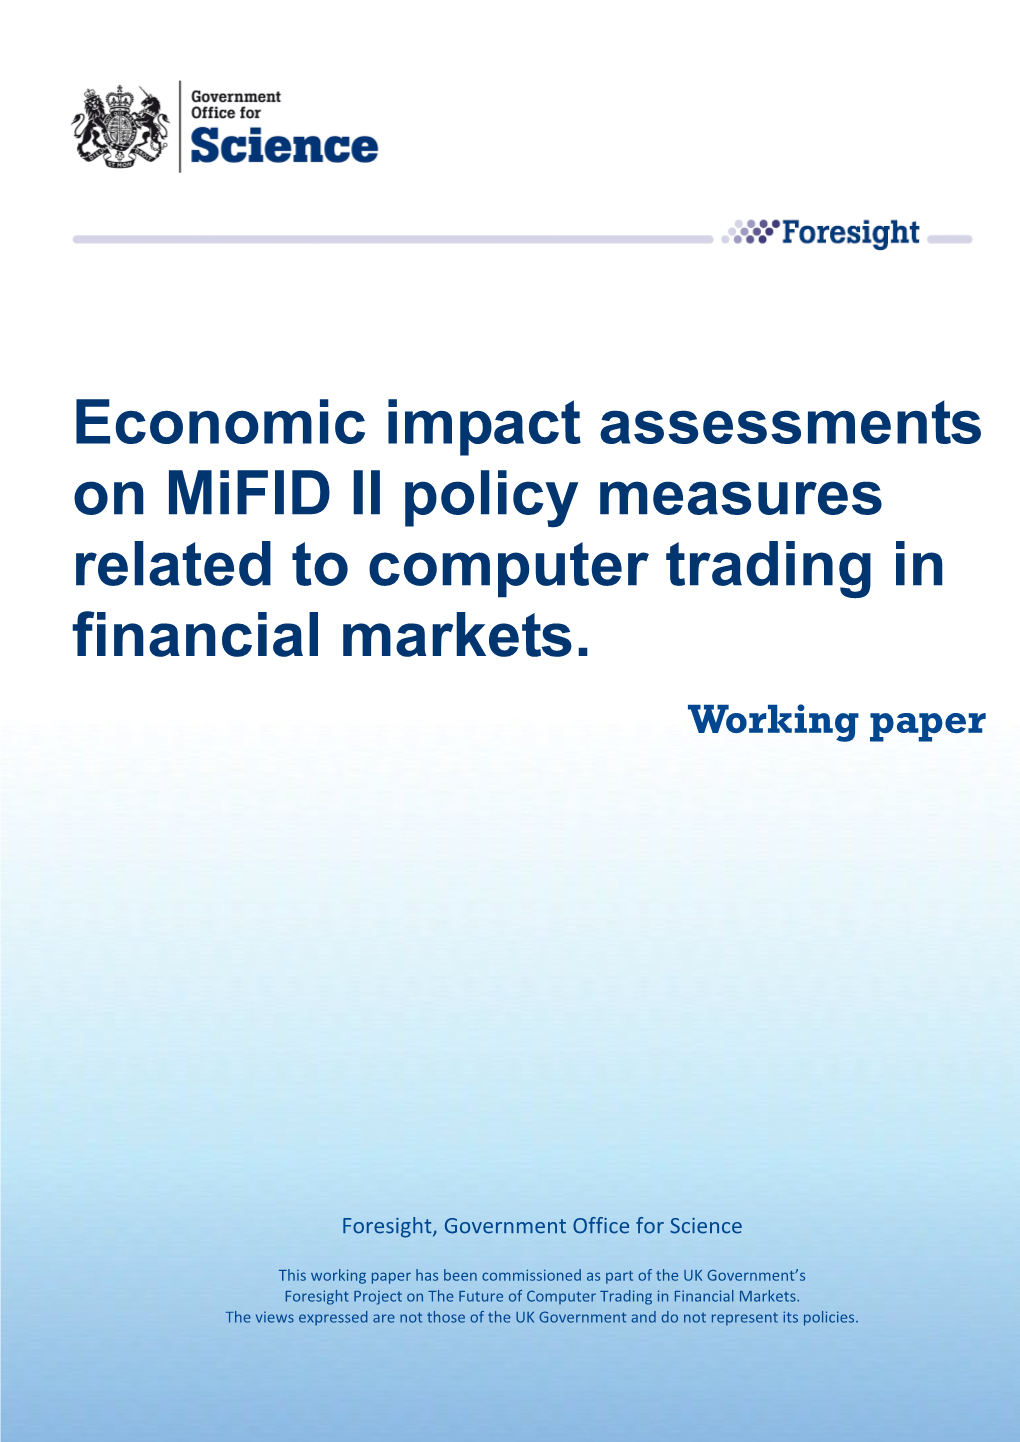 Economic Impact Assessments on Mifid II Policy Measures Related to Computer Trading in Financial Markets: Working Paper